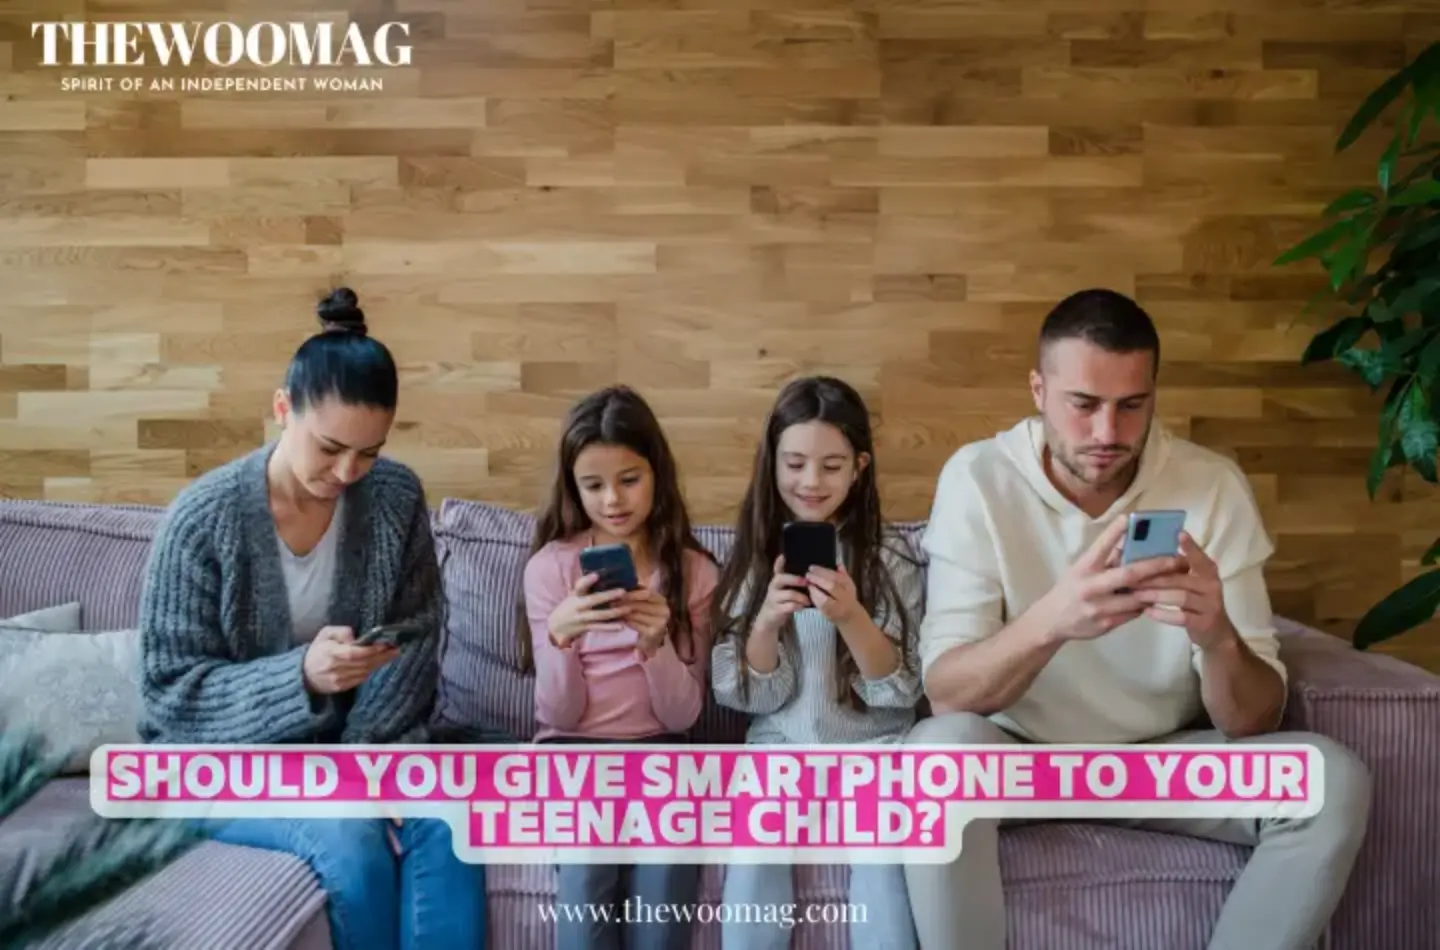 Parenting: Should You Give Smartphone to Your Teenage child?